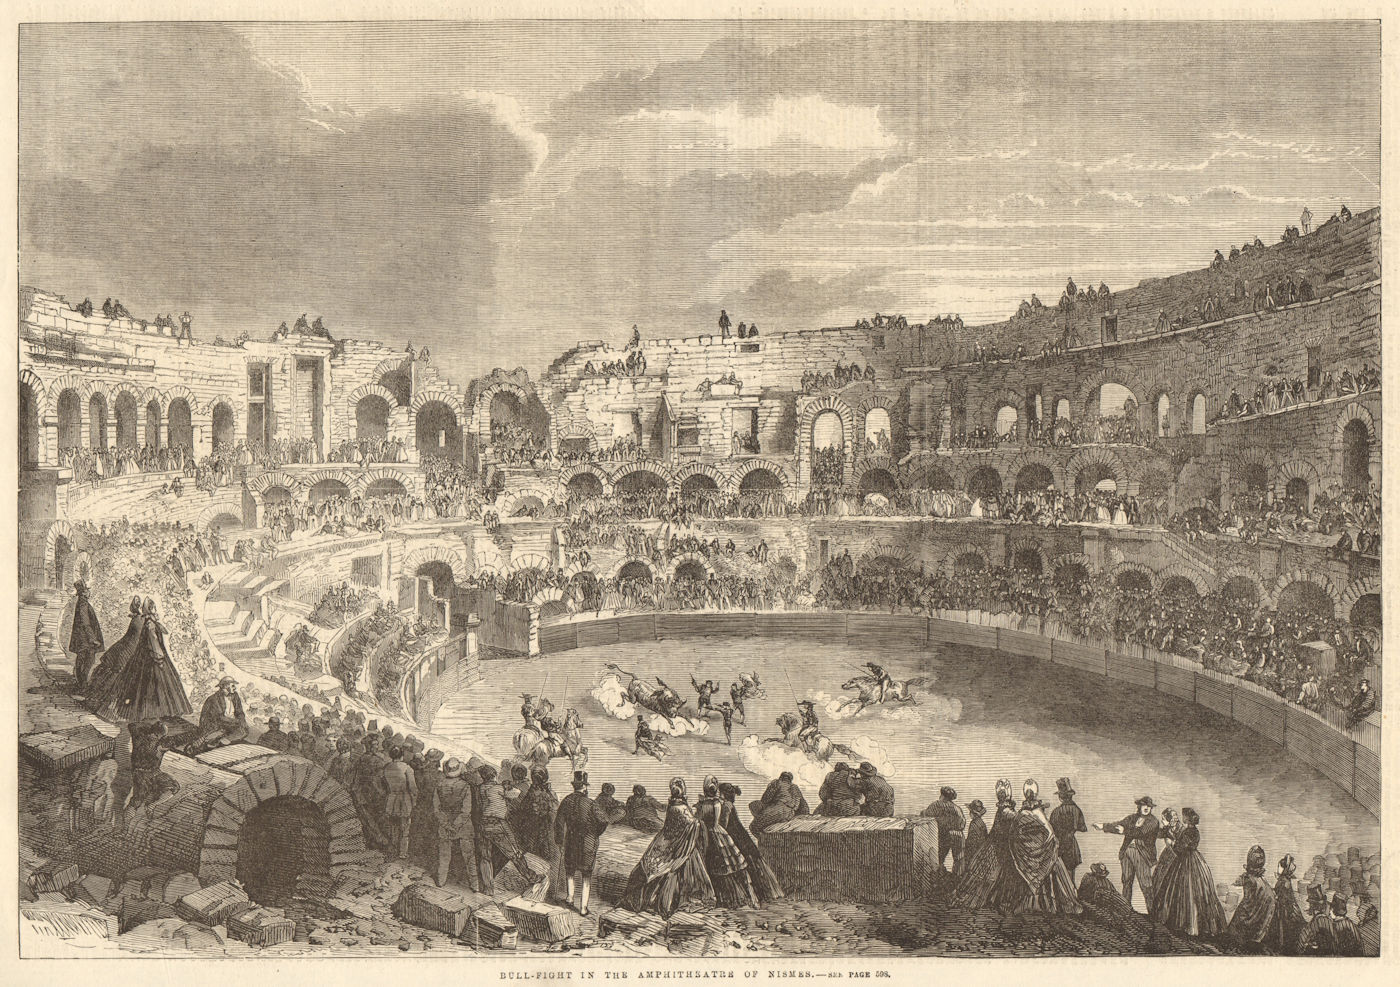 Bull-fight in the amphitheatre of Nimes. Gard. Bull fighting 1863 old print